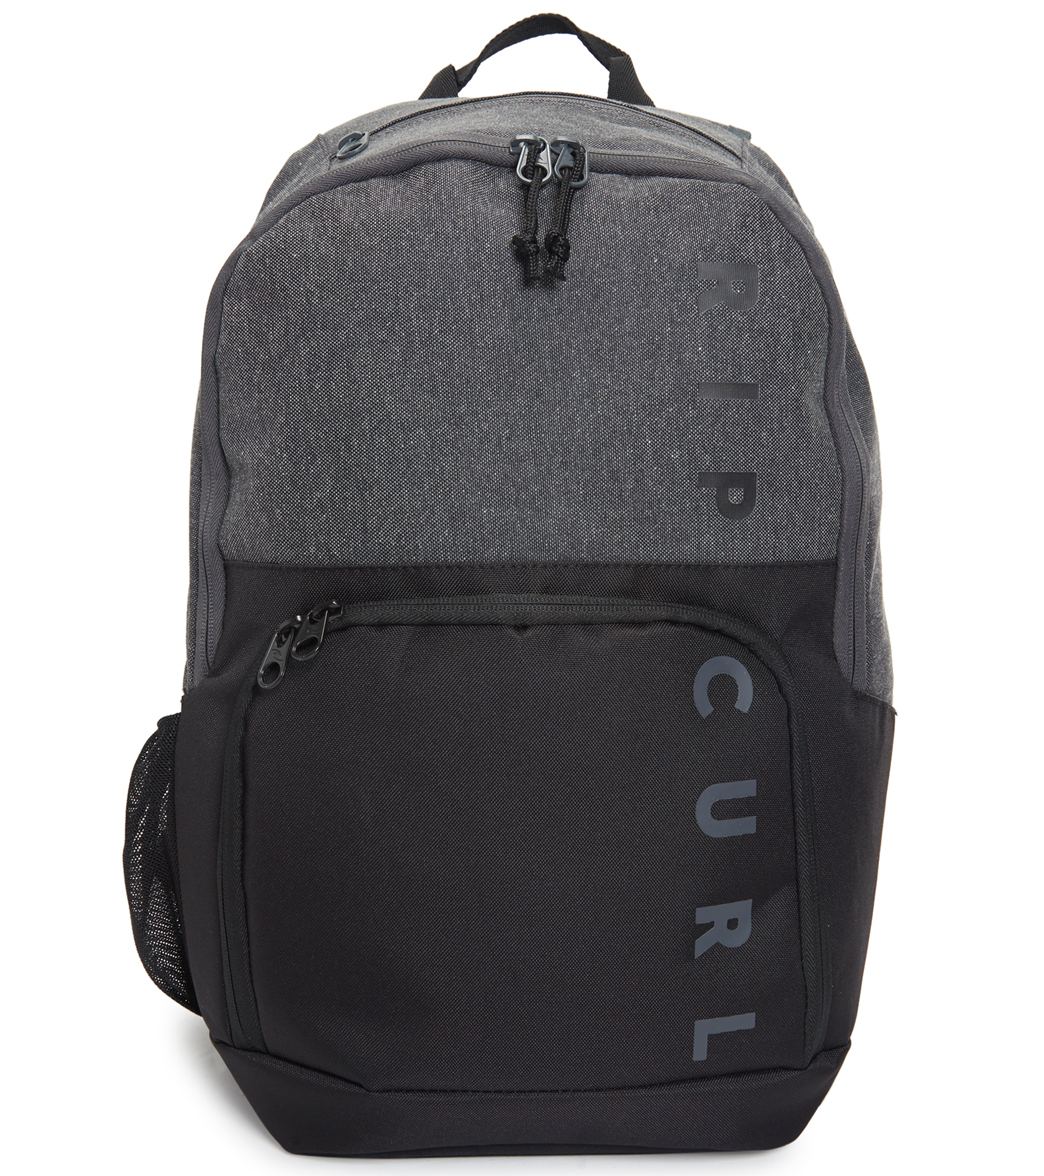 Rip Curl Evo Combined Logo Backpack - Black One Size - Swimoutlet.com